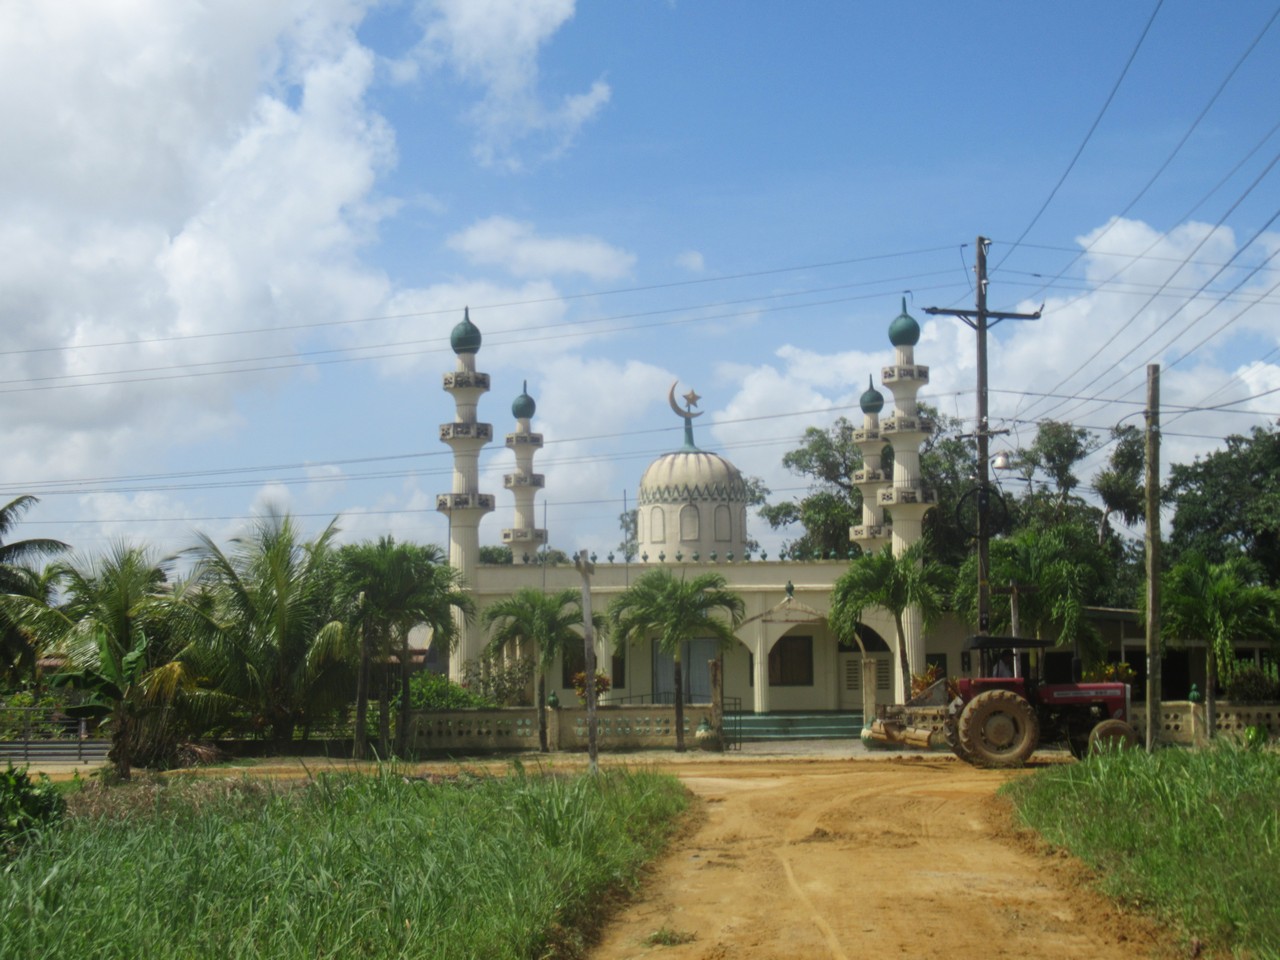 Temples, mosques and tractors.